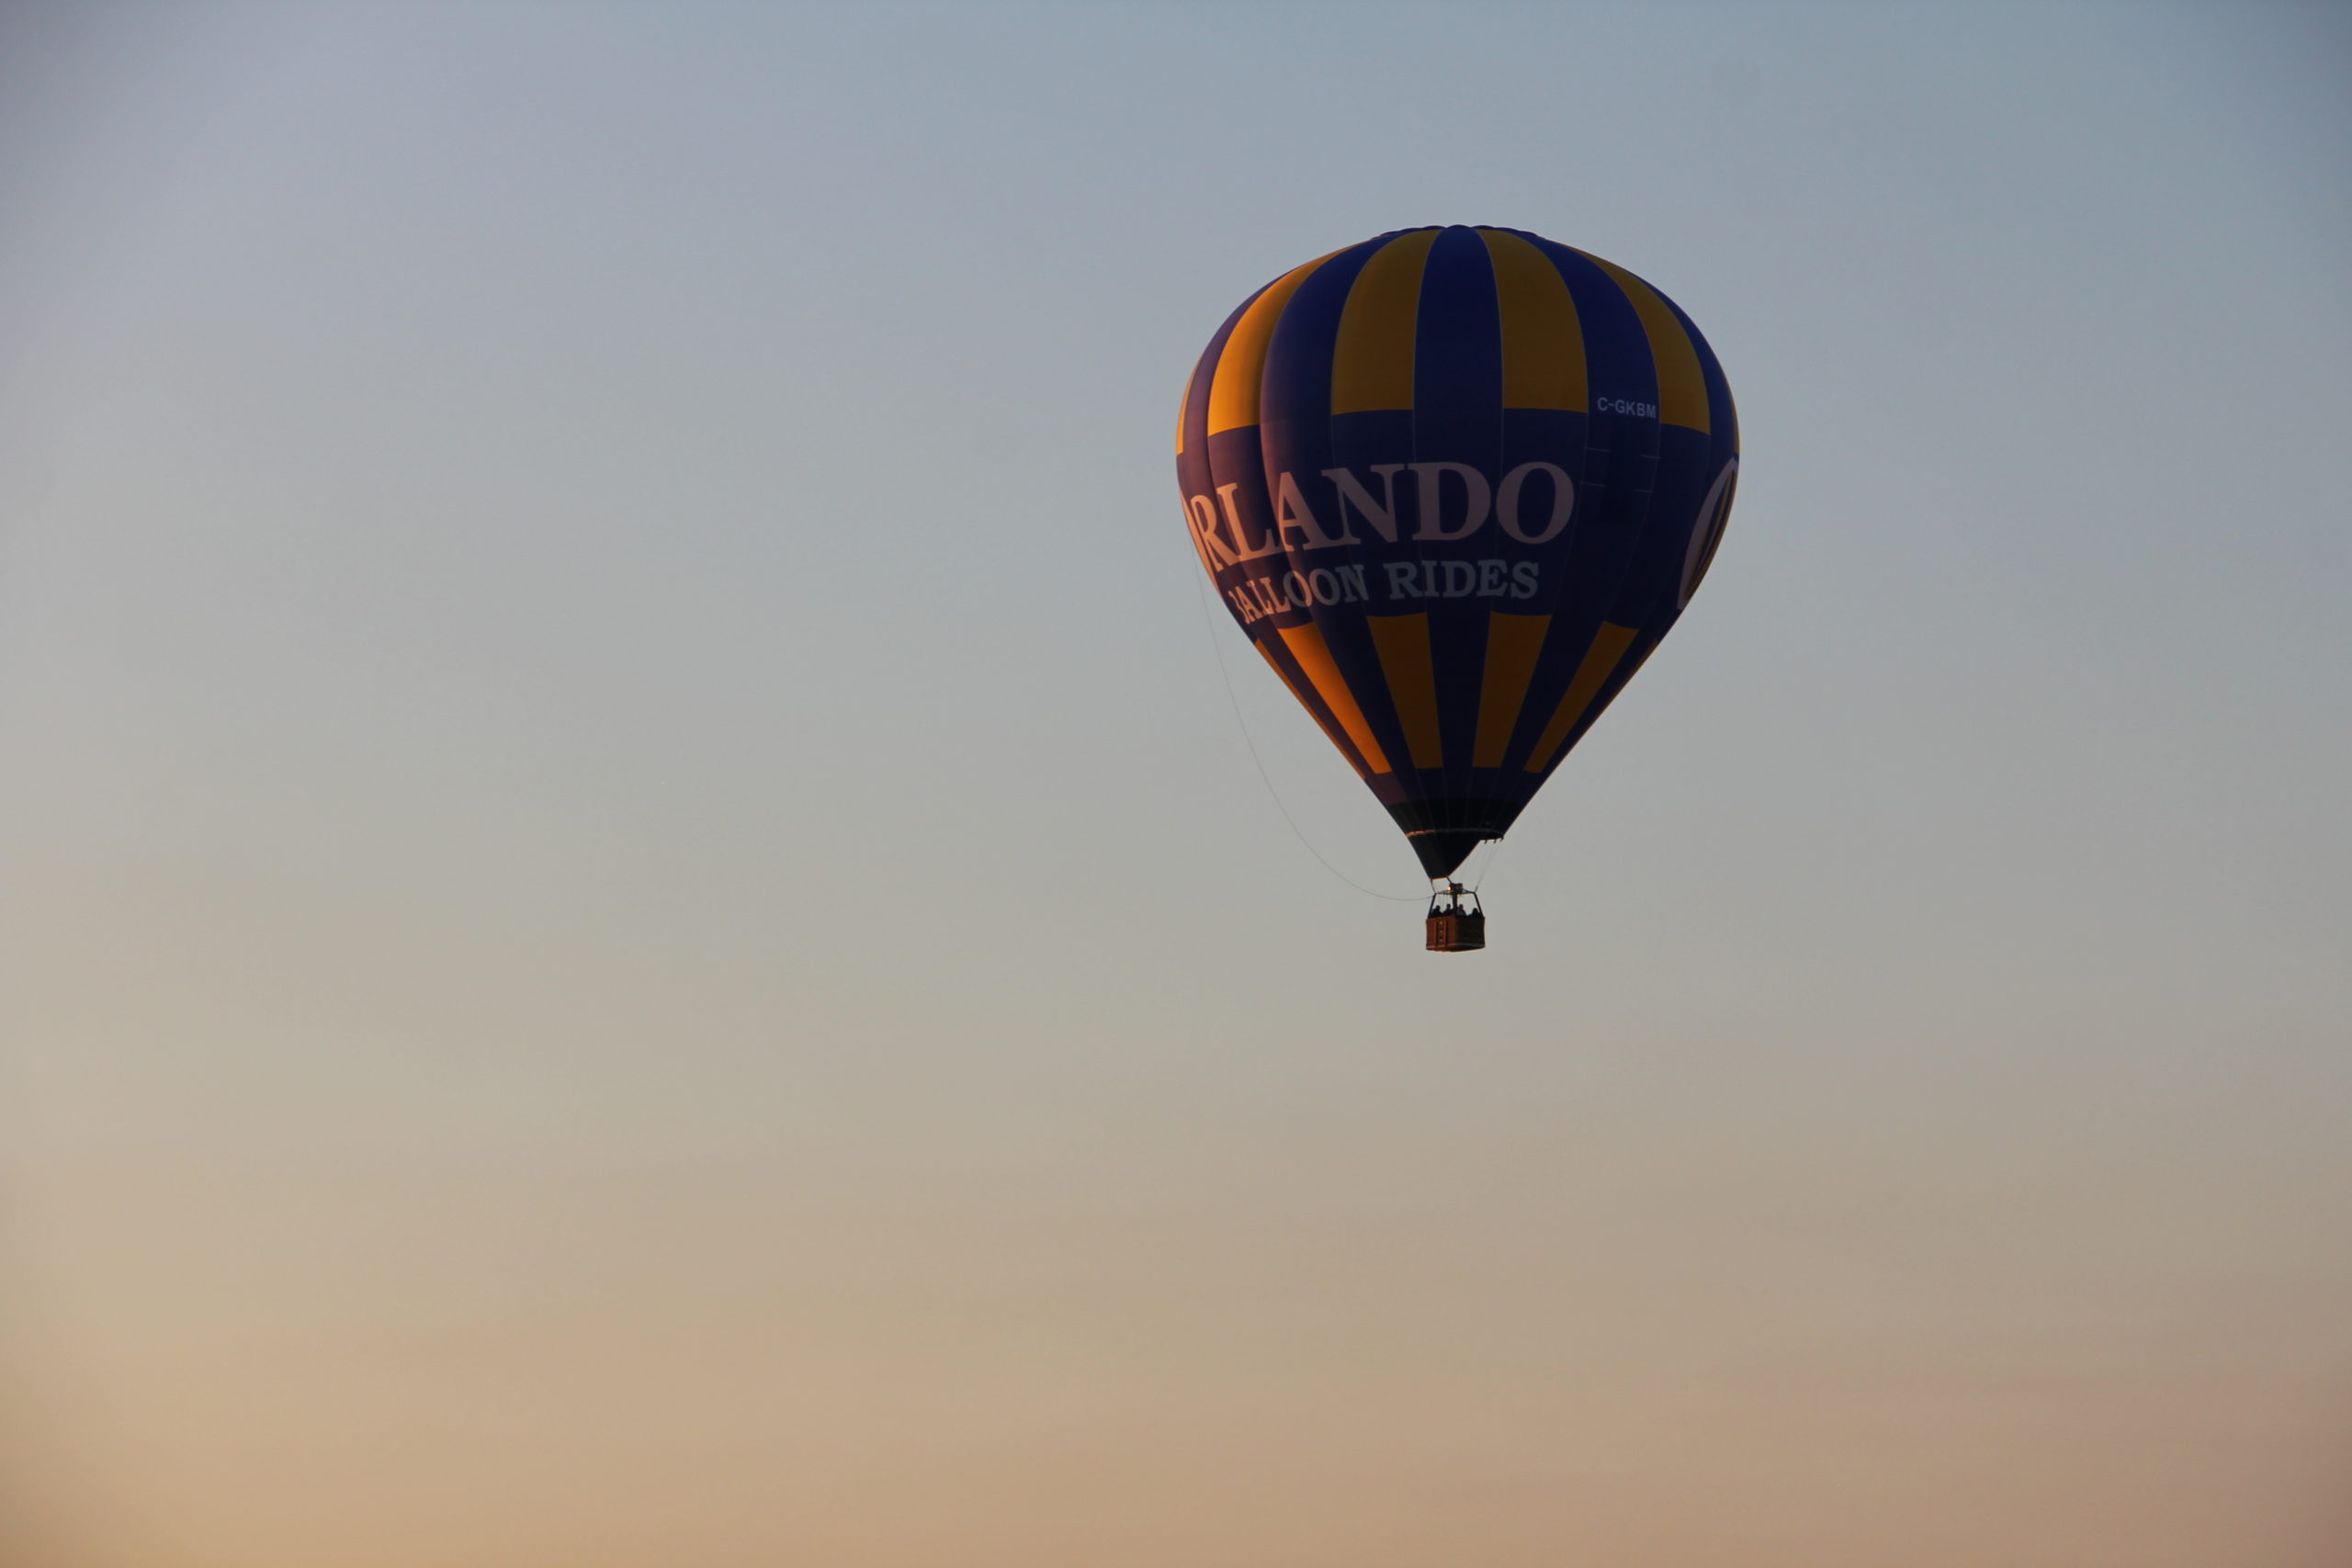 Checking off a bucket list item with a Hot Air Balloon Ride in Orlando Florida | Riding a hot air ballon | Orlando Balloon Rides | acupful.com | Mandy Carter | Things to do in Orlando | #LoveFl | once in a lifetime experiences | balloon rides | romantic adventures